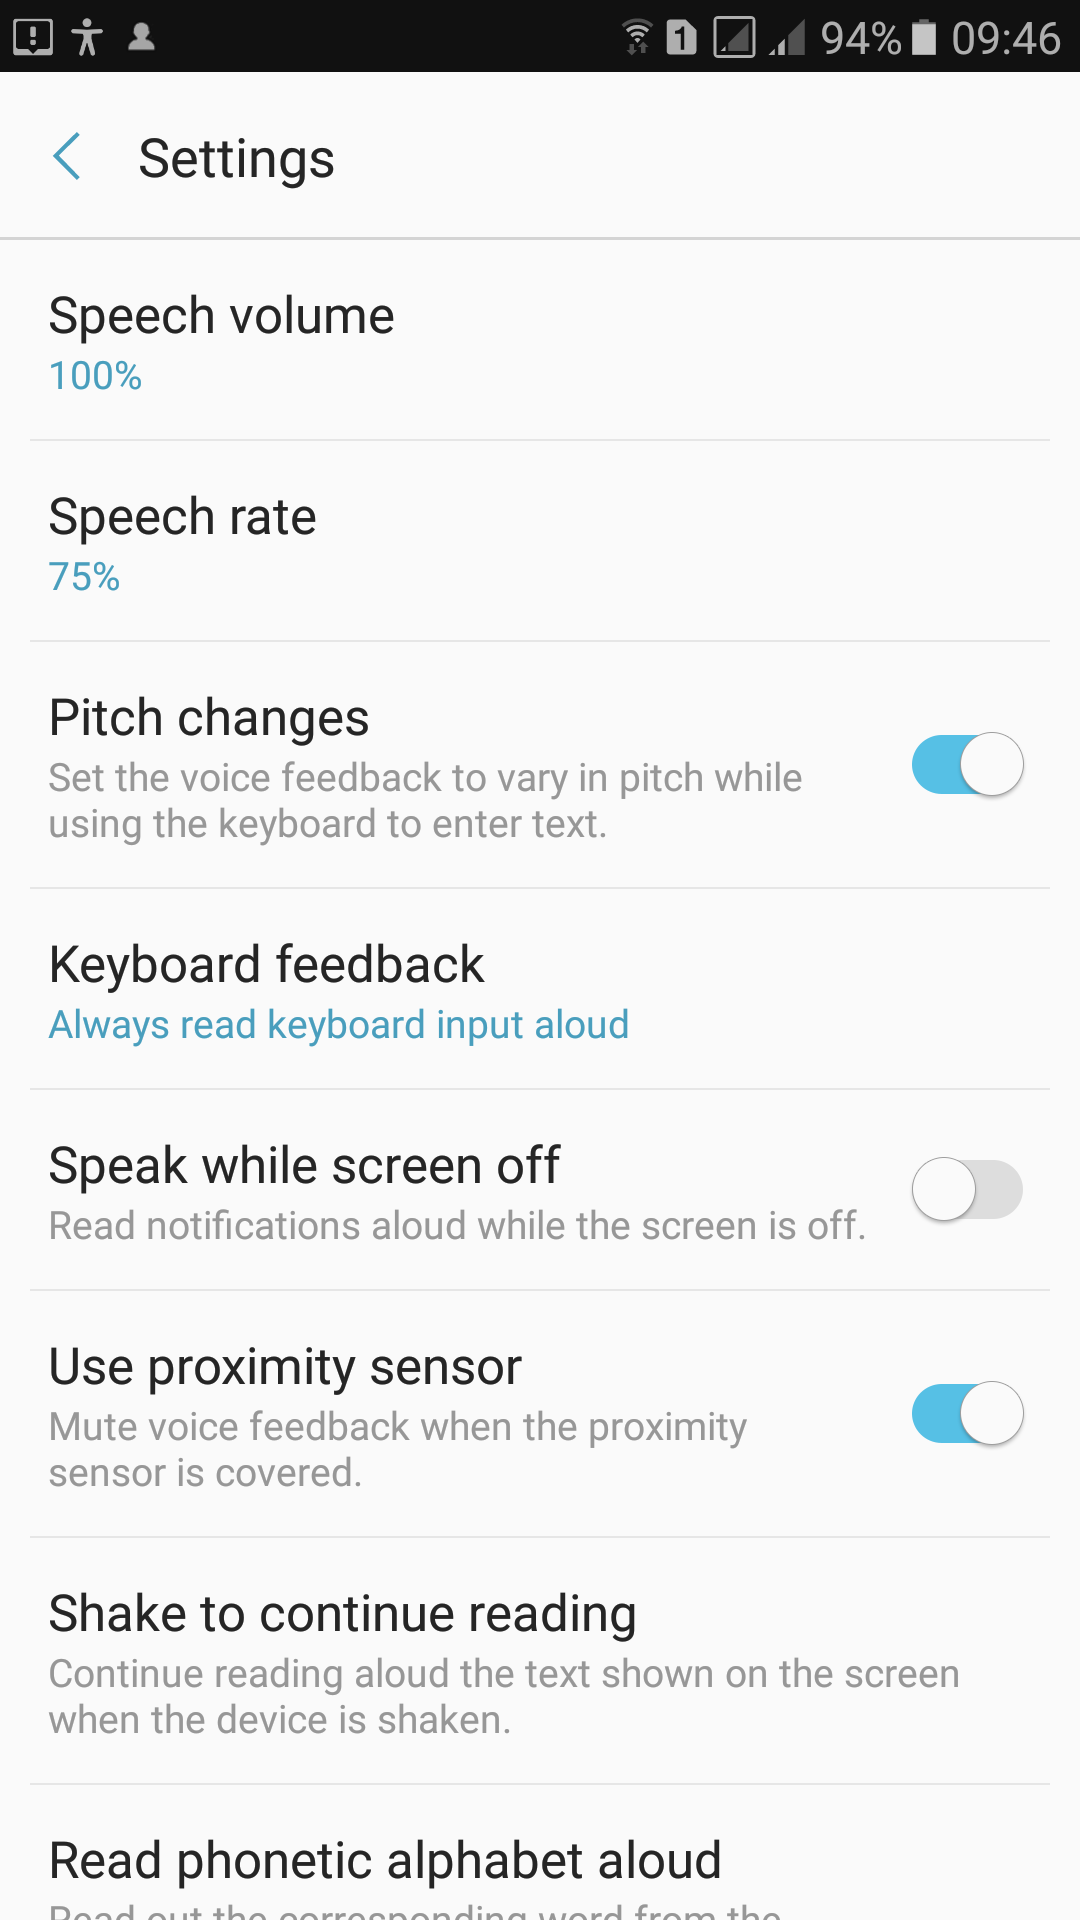 The Voice assistant's settings interface.